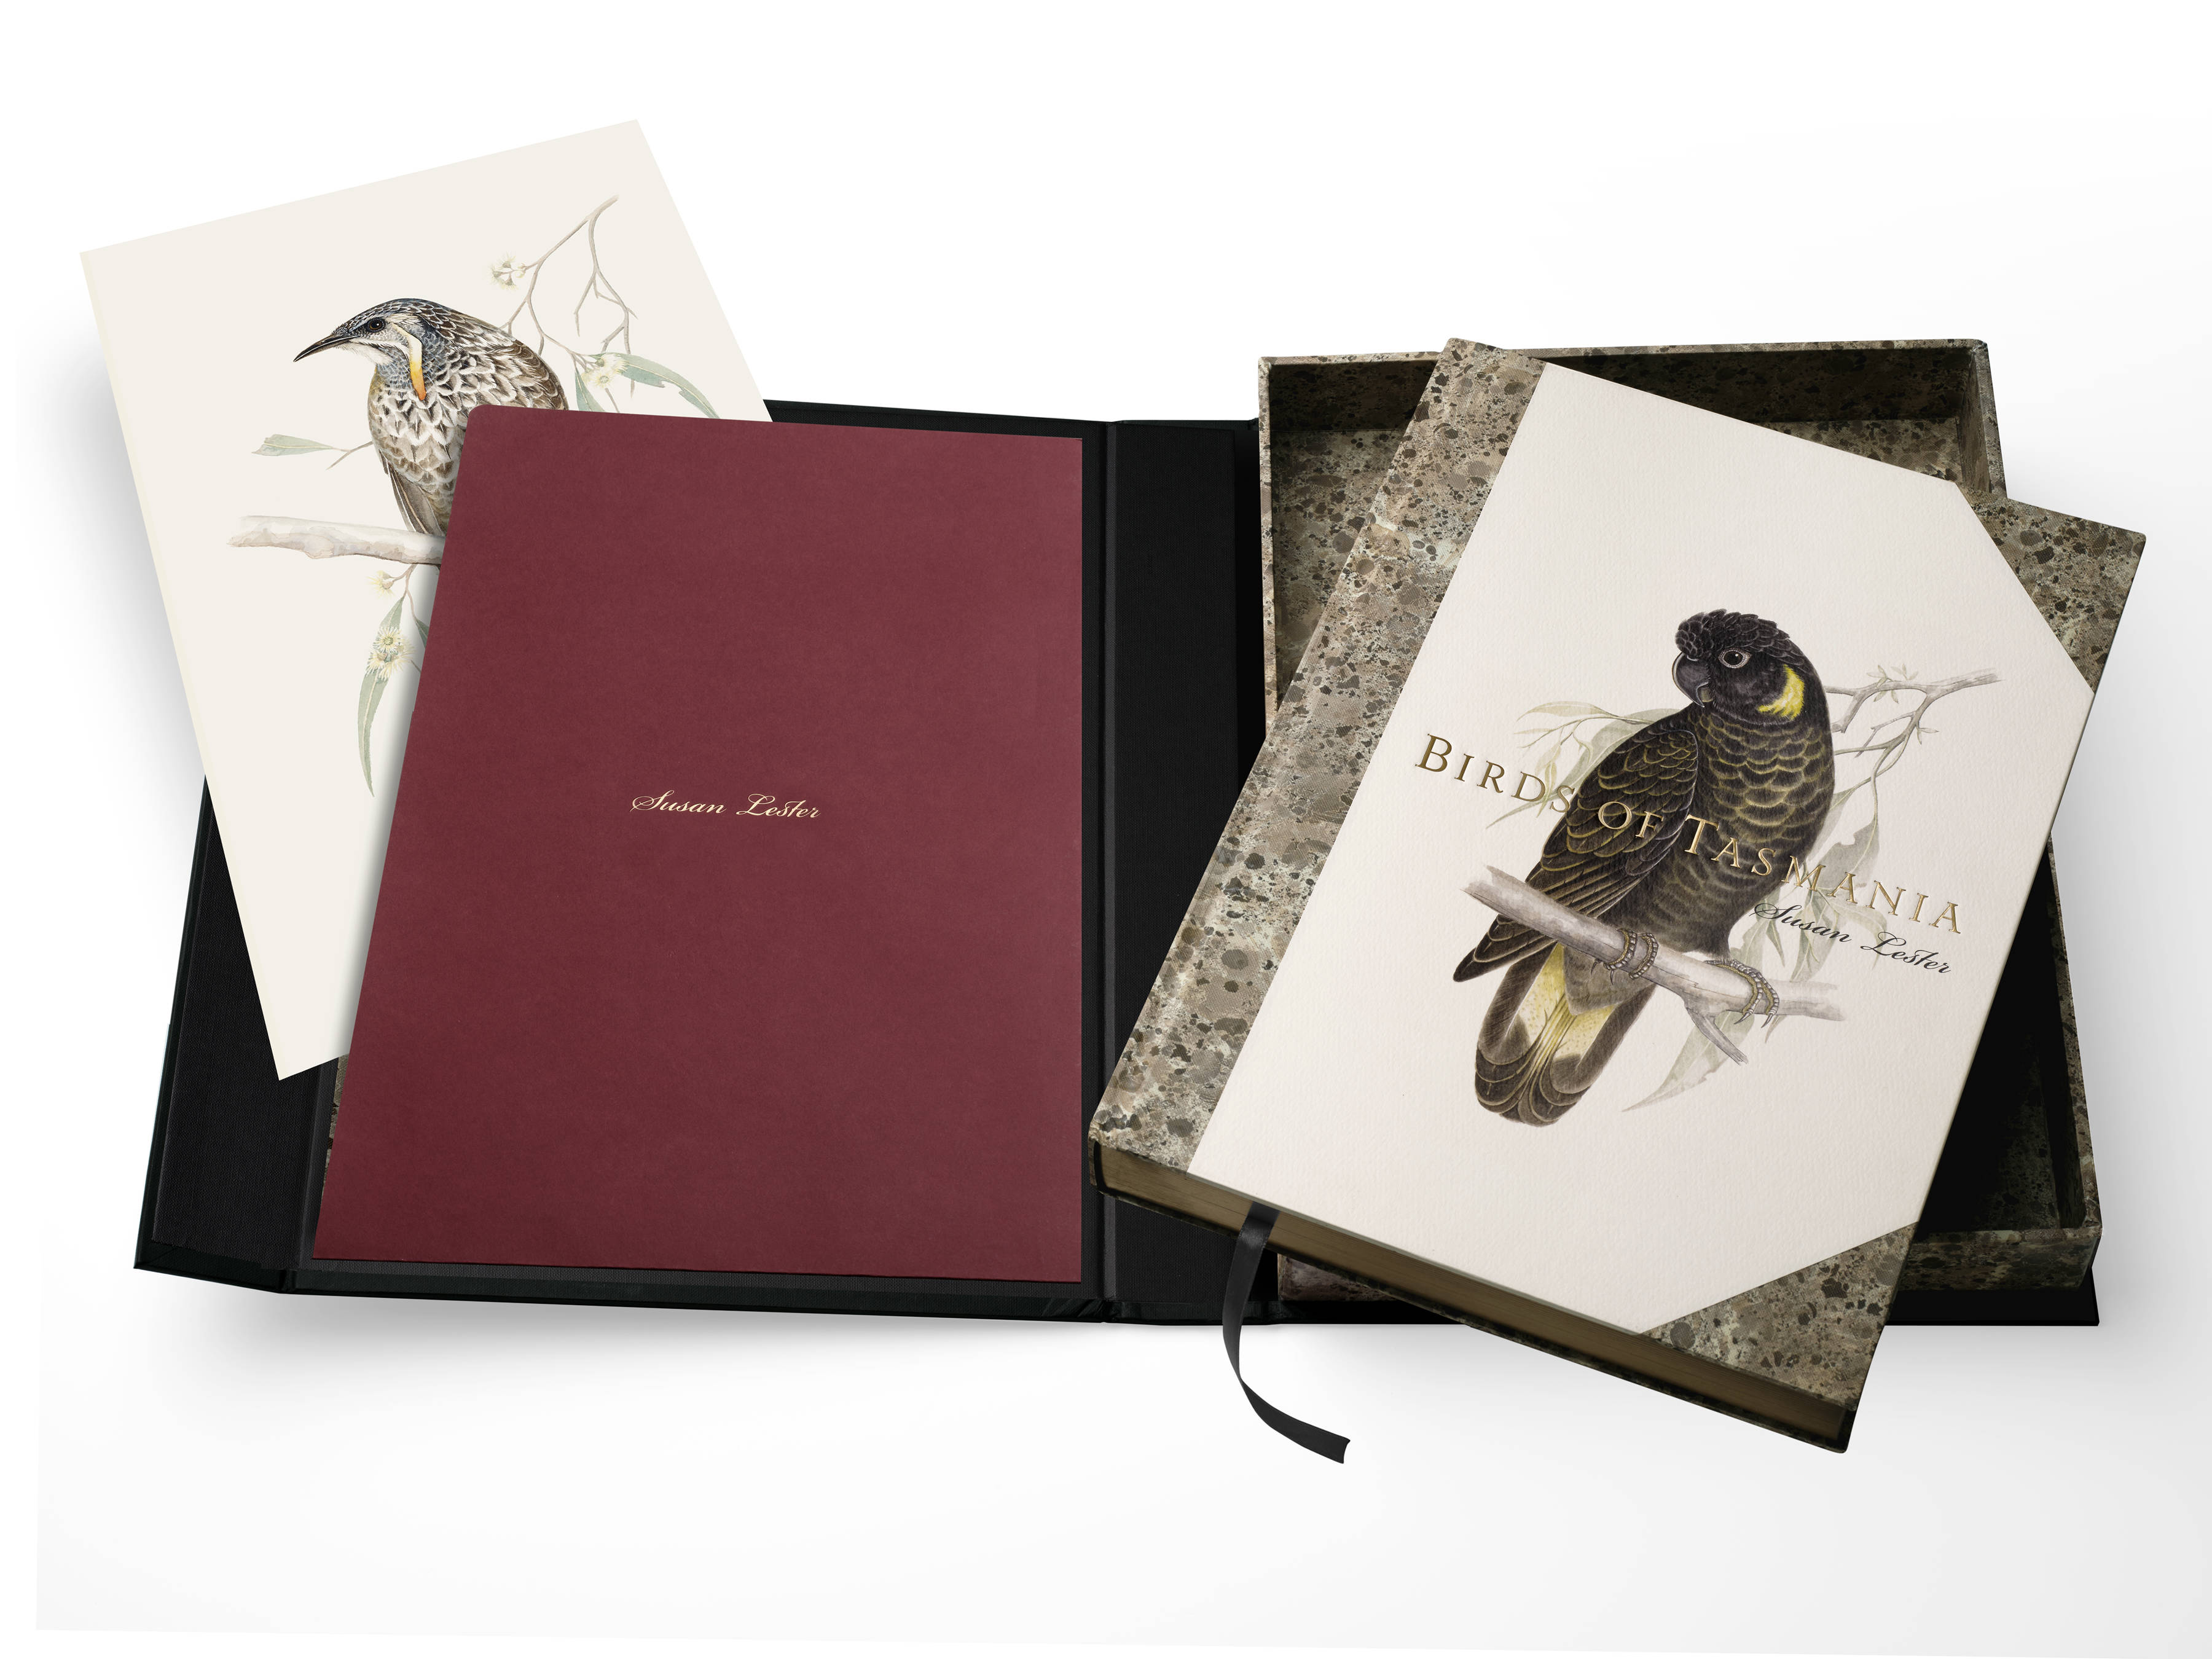 An image of a fully open ‘Birds of Tasmania’ by Susan Lester clamshell presentation box. On the right the book is sitting out of the box revealing its charcoal ribbon. On the left is the claret-red folder with a Yellow Wattlebird ‘Anthochaera paradoxa’ archival print pictured sliding out of the folder.